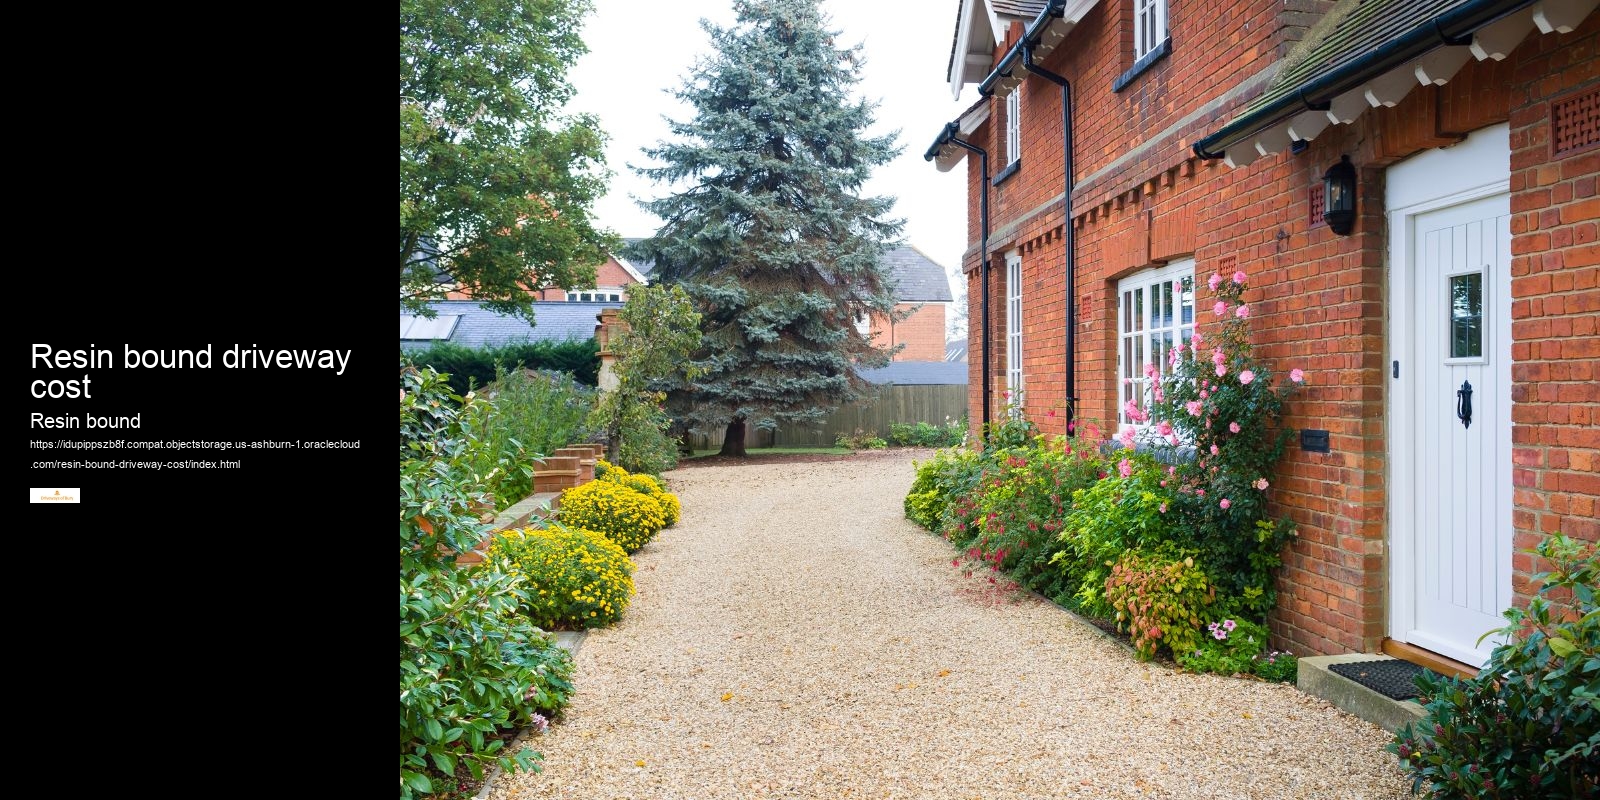 Resin bound driveway cost